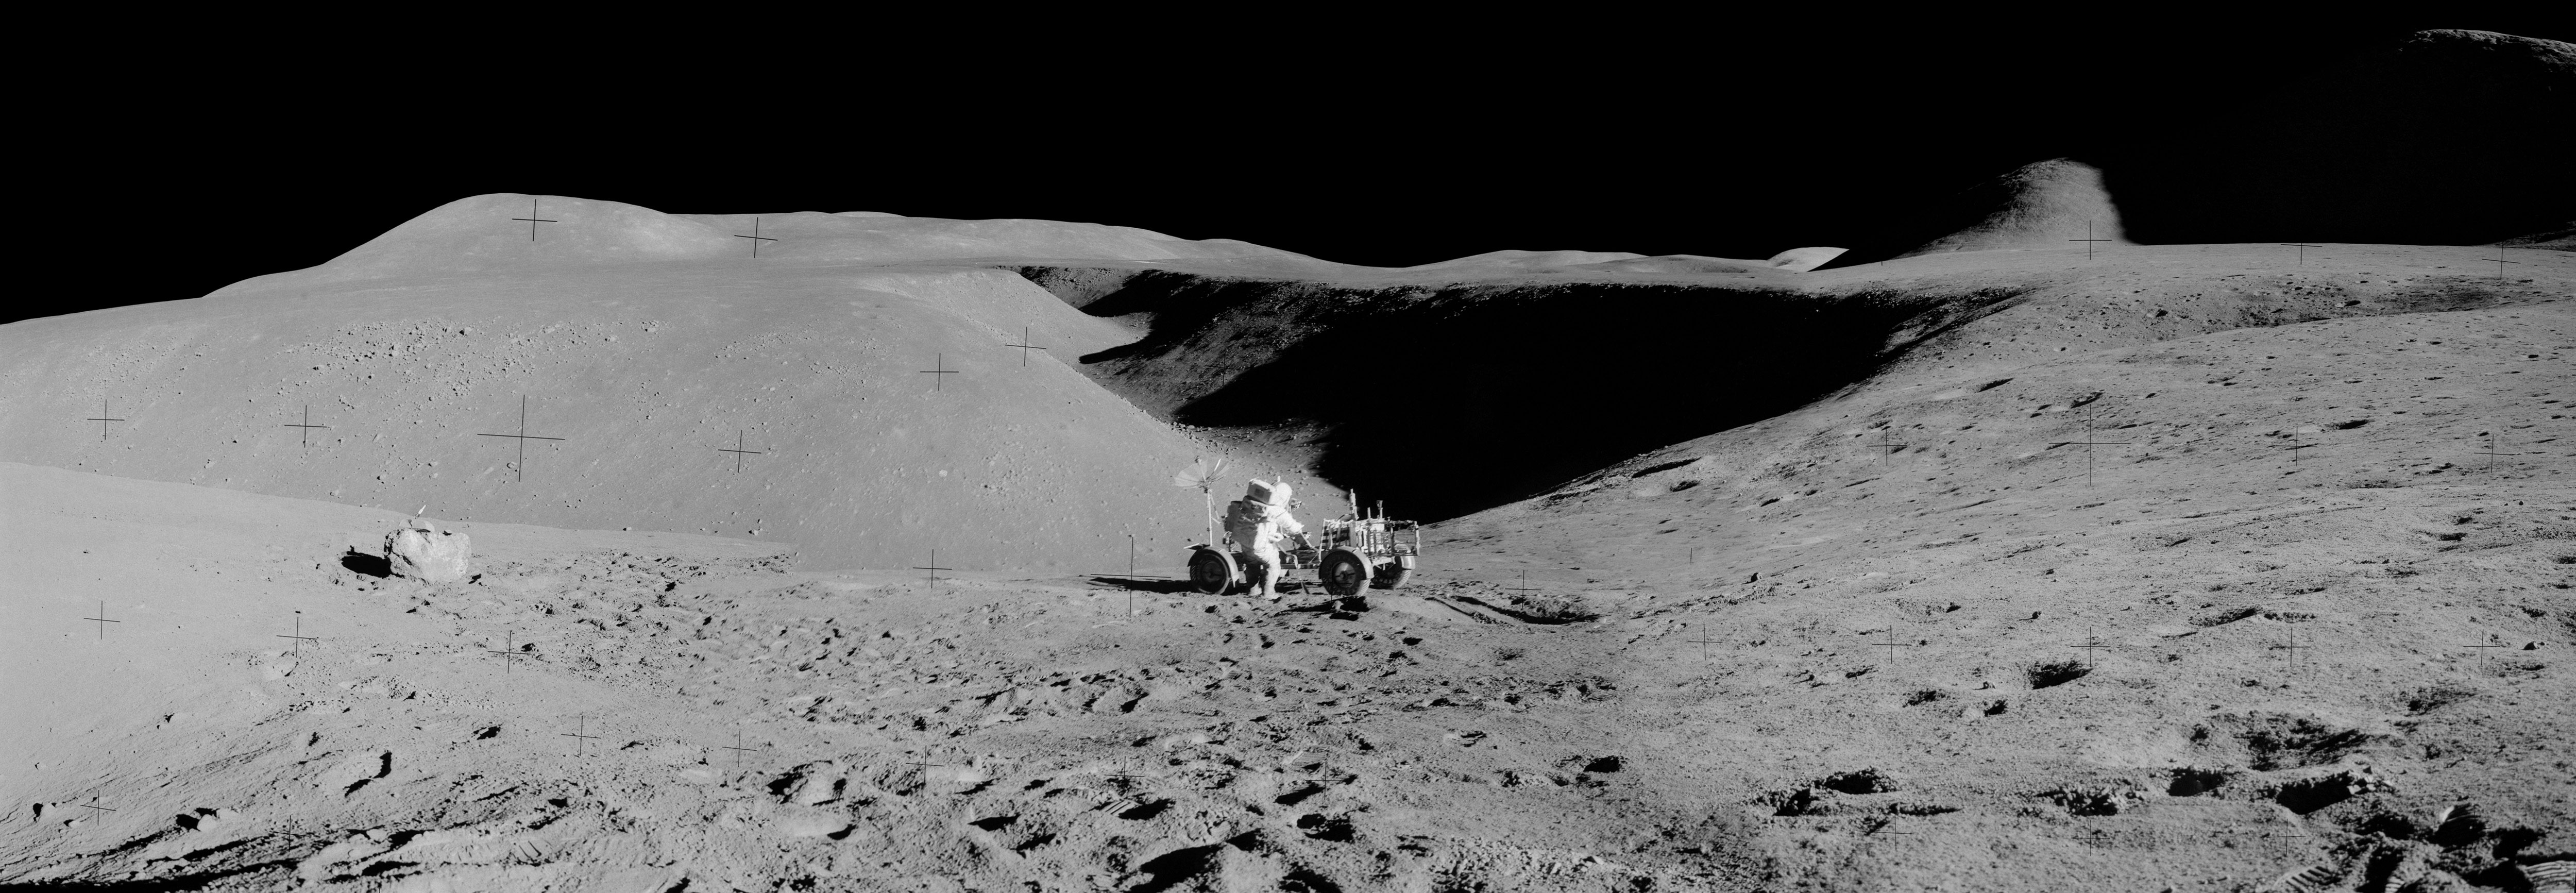 Apollo 15 astronaut Dave Scott and the Lunar Rover with a view up Hadley Rille in the background. Credit: NASA via Retro Space Images